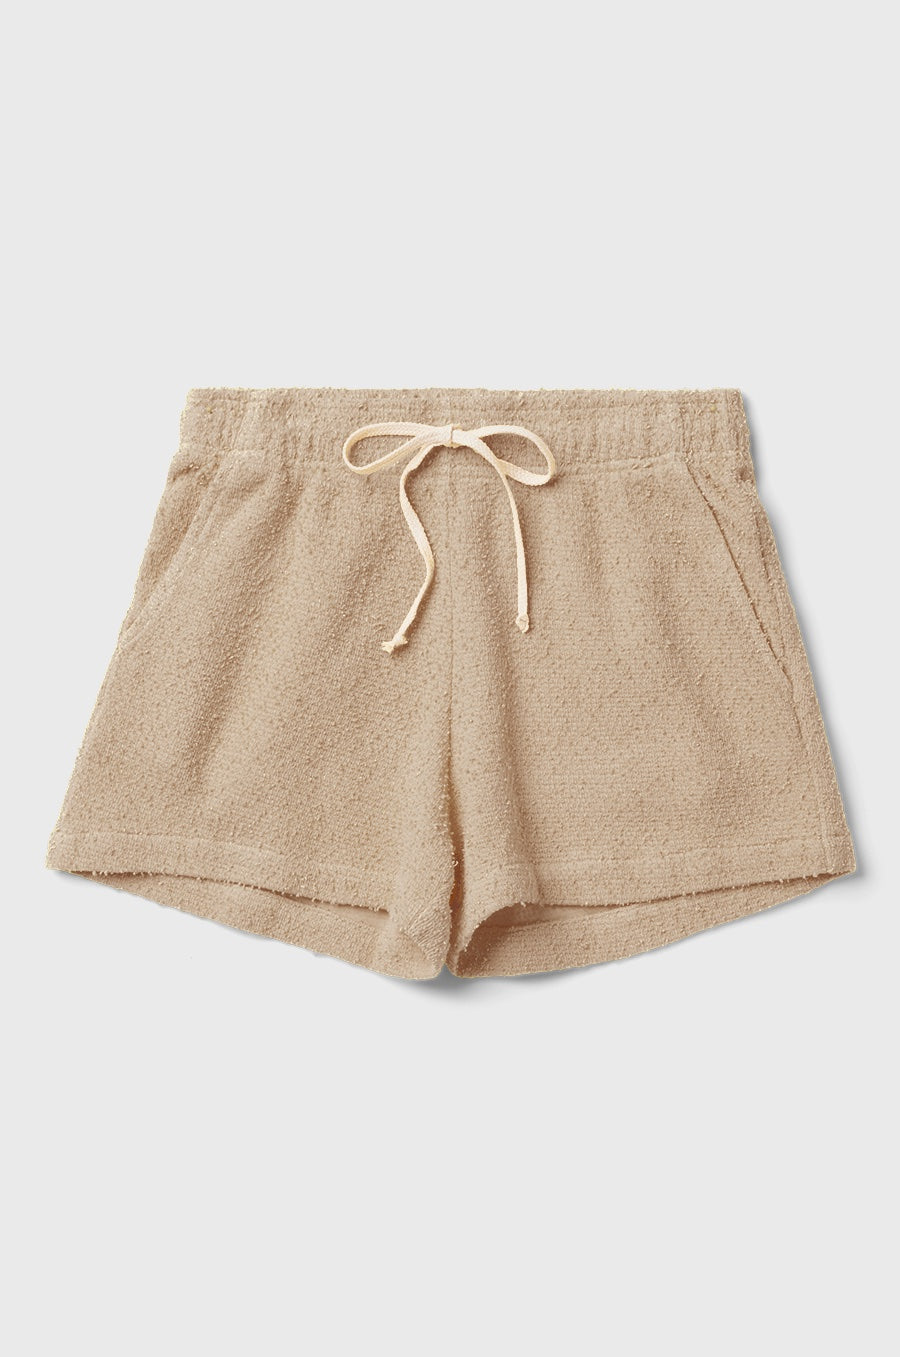 the lady & the sailor Weekend Short in Stone Boucle.